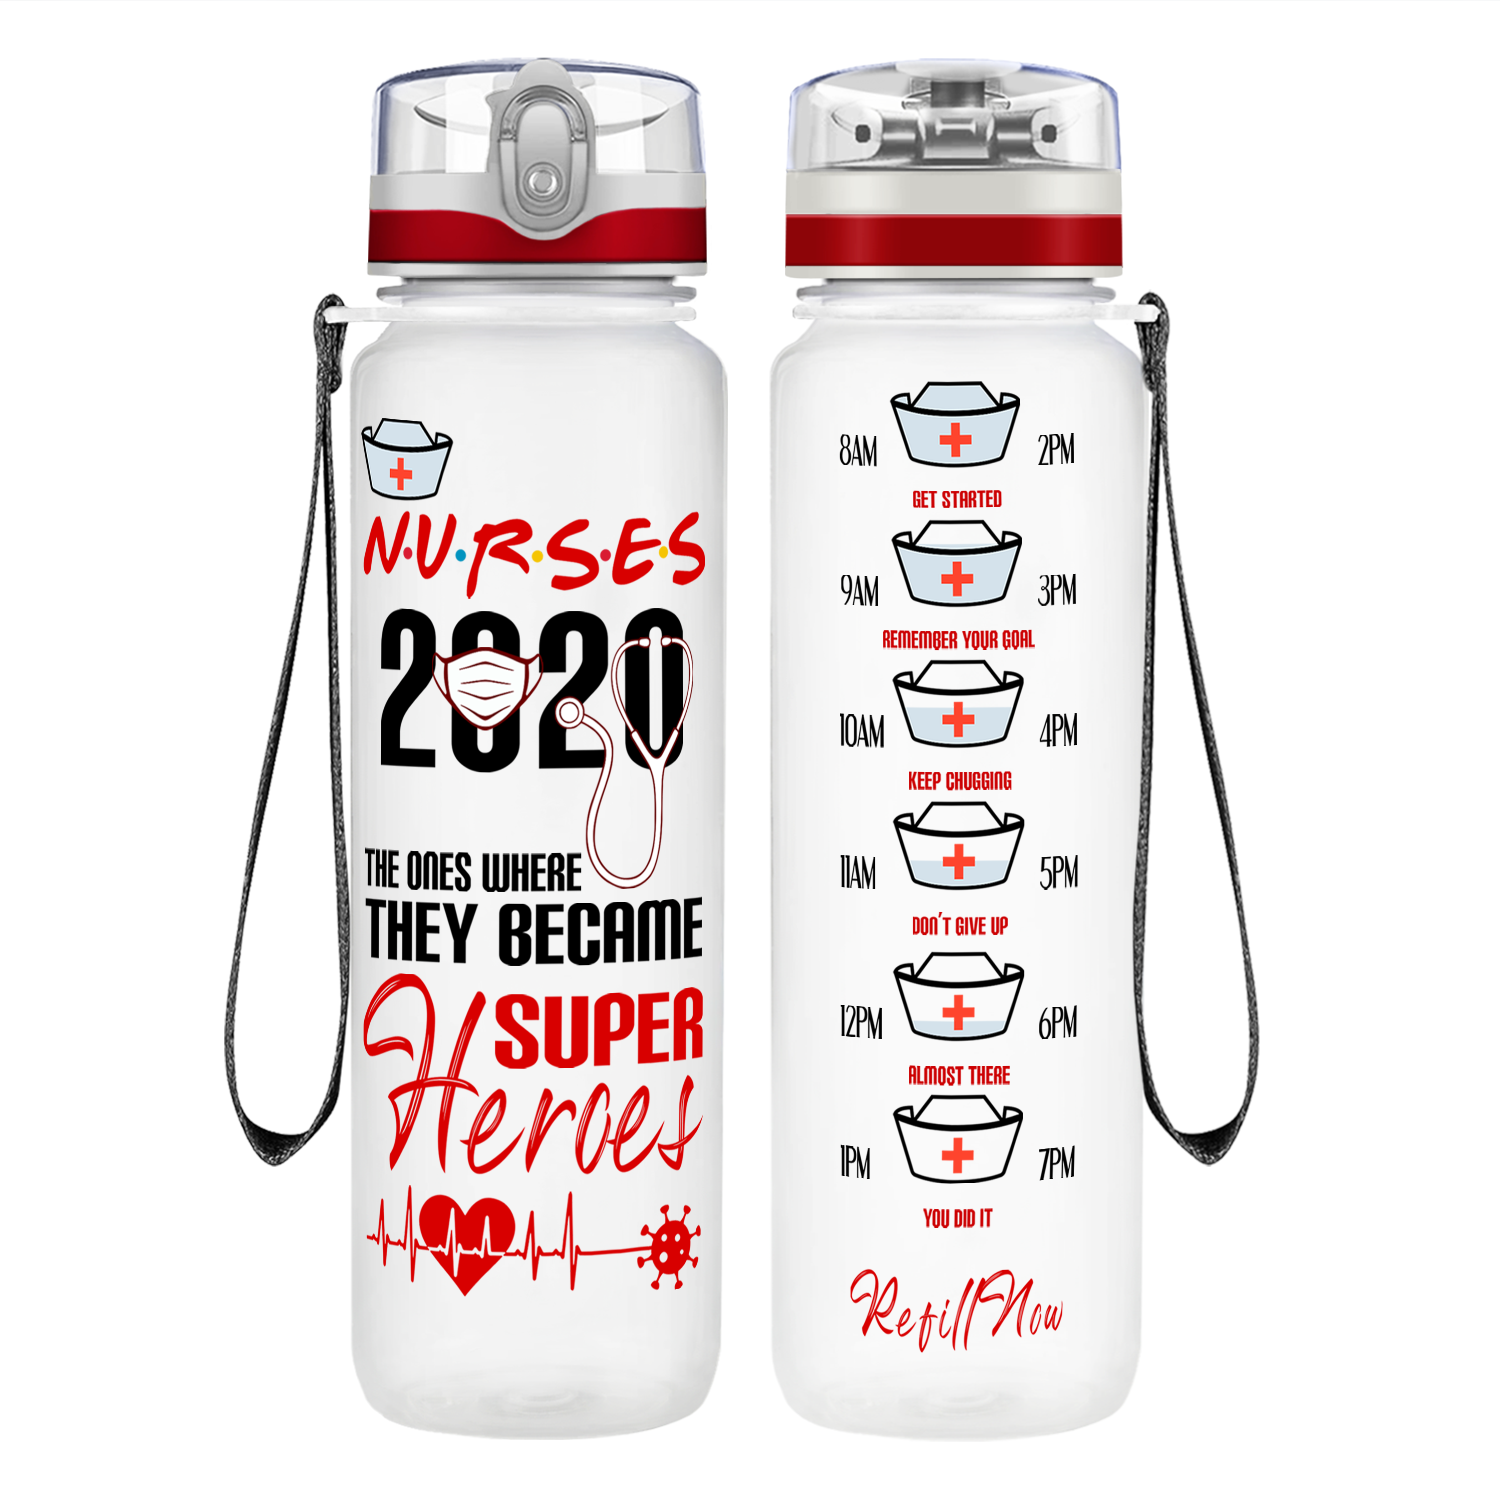 Nurses 2020 Where They Became Super Heroes Motivational Tracking Water Bottle